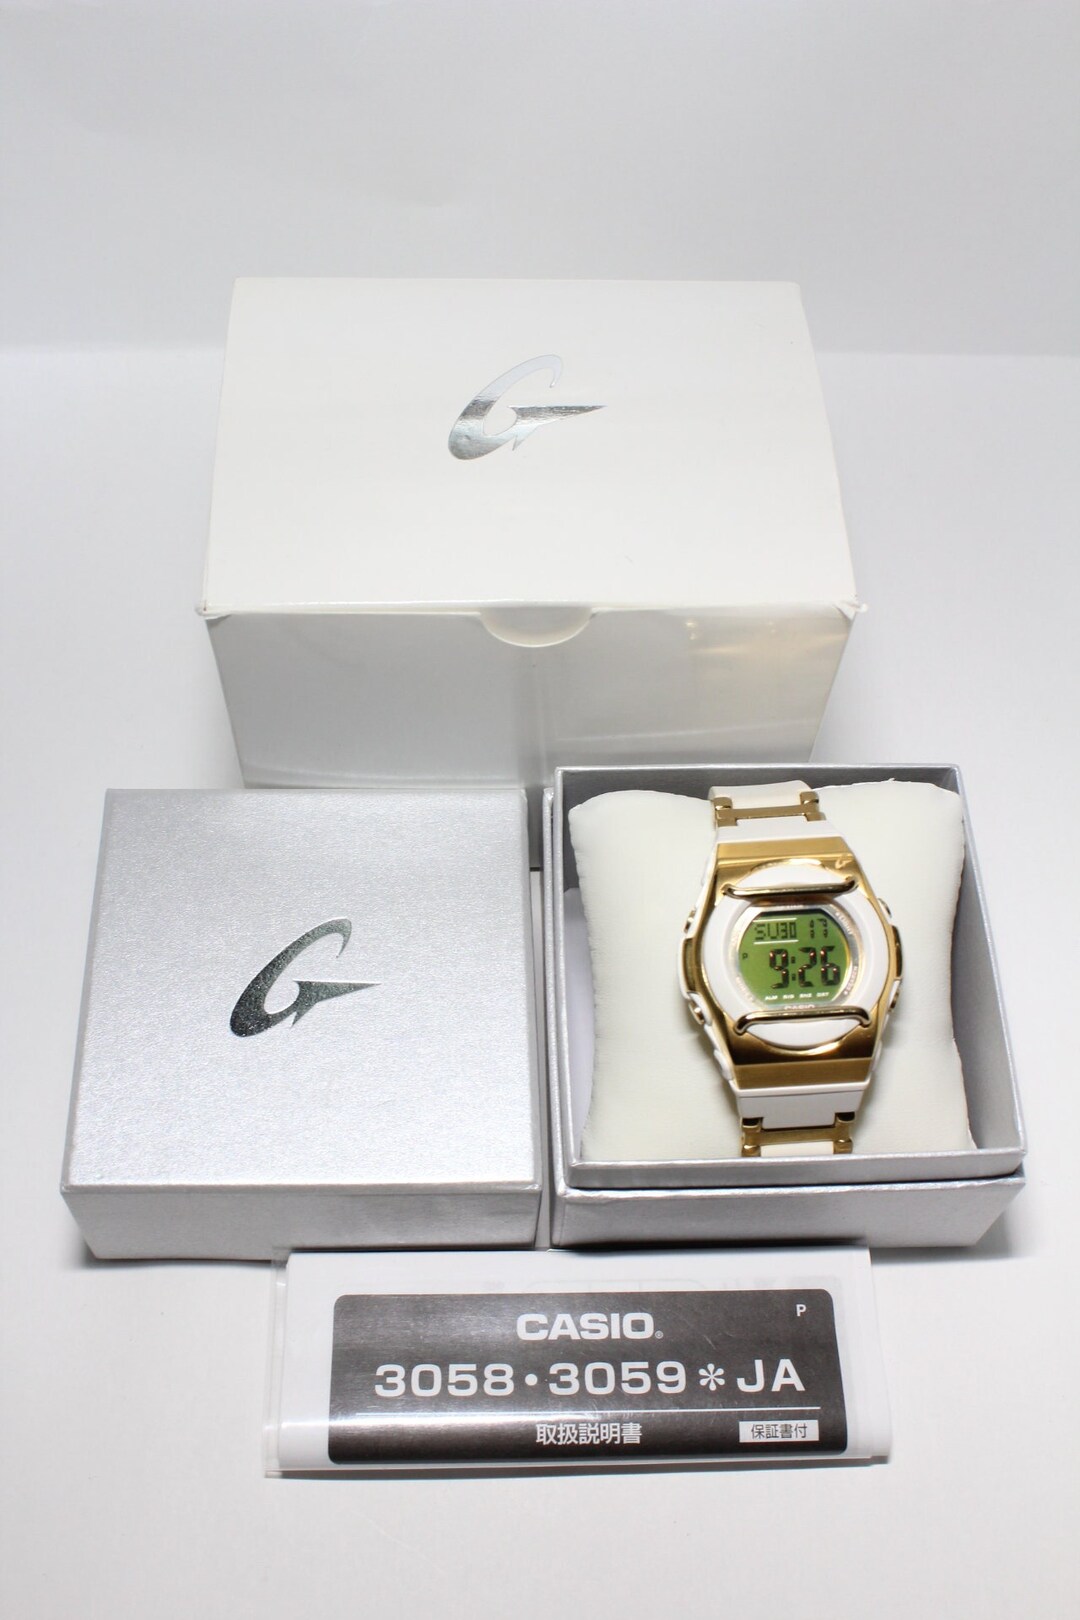 CASIO MSG-163CG White Gold Baby-G shock resistant G-ms watch Etsy 日本